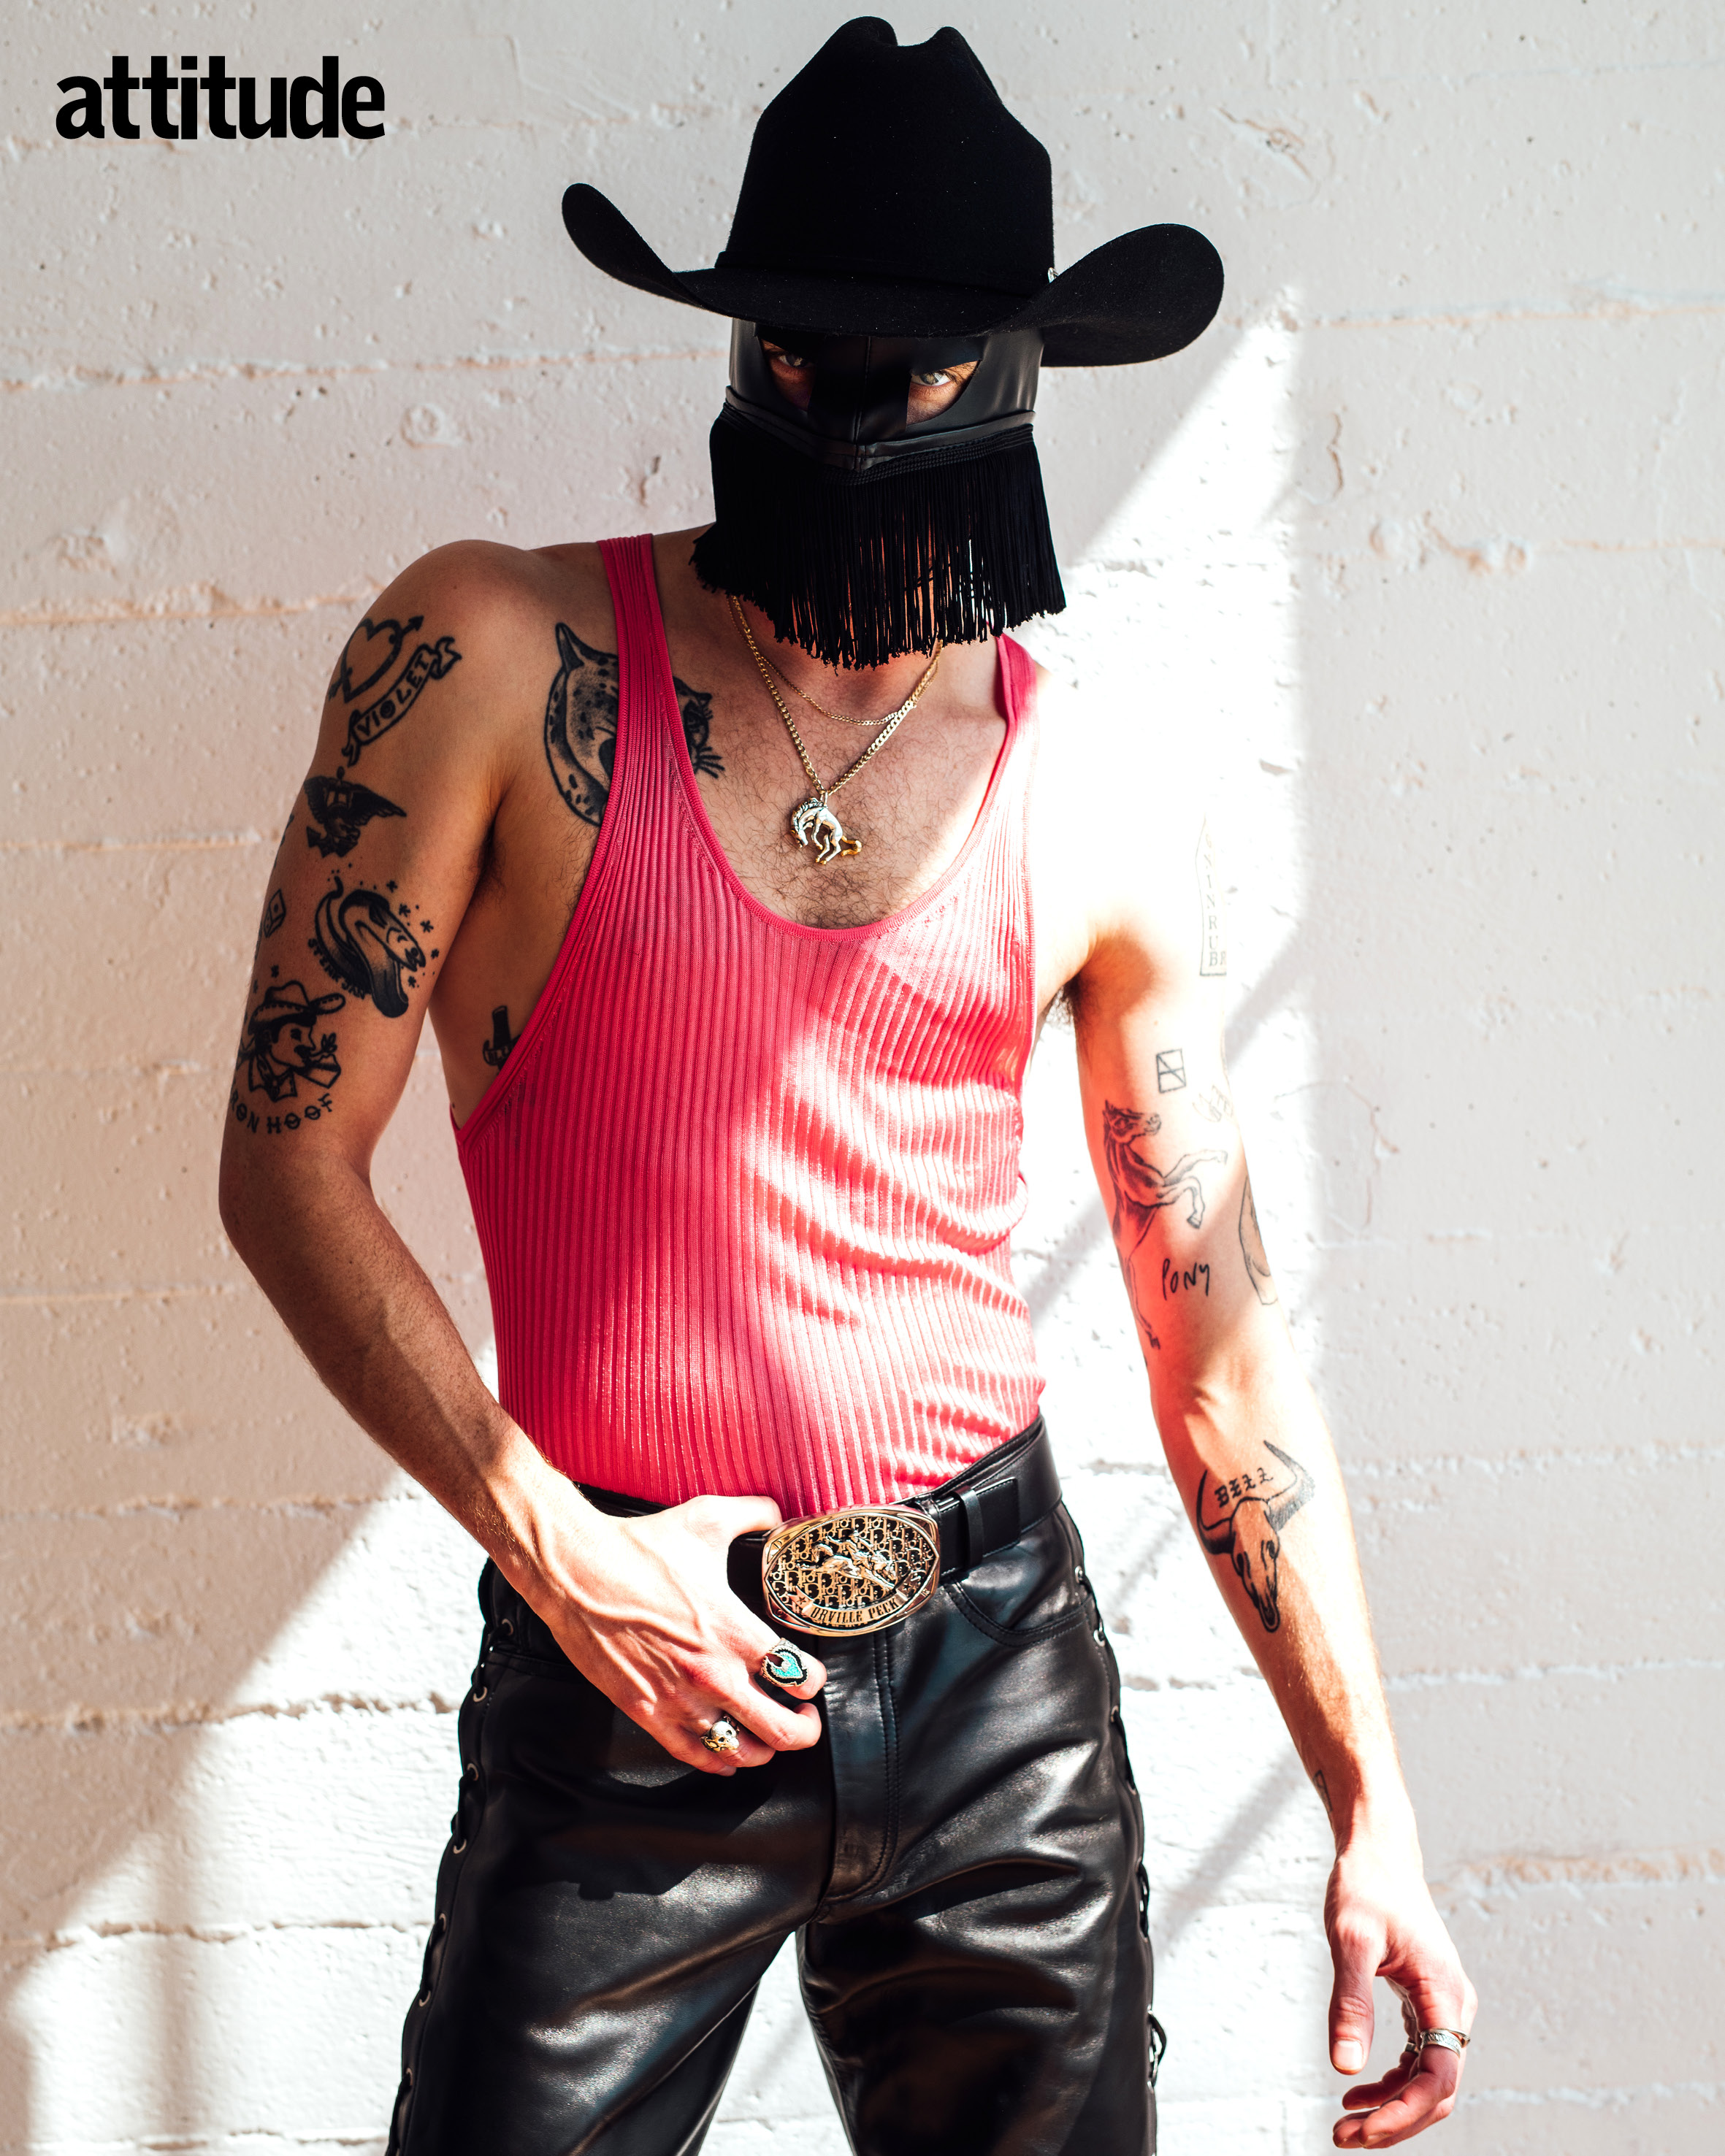 Orville Peck and Diplo on cowboys, queer culture, and their special bond -  Attitude